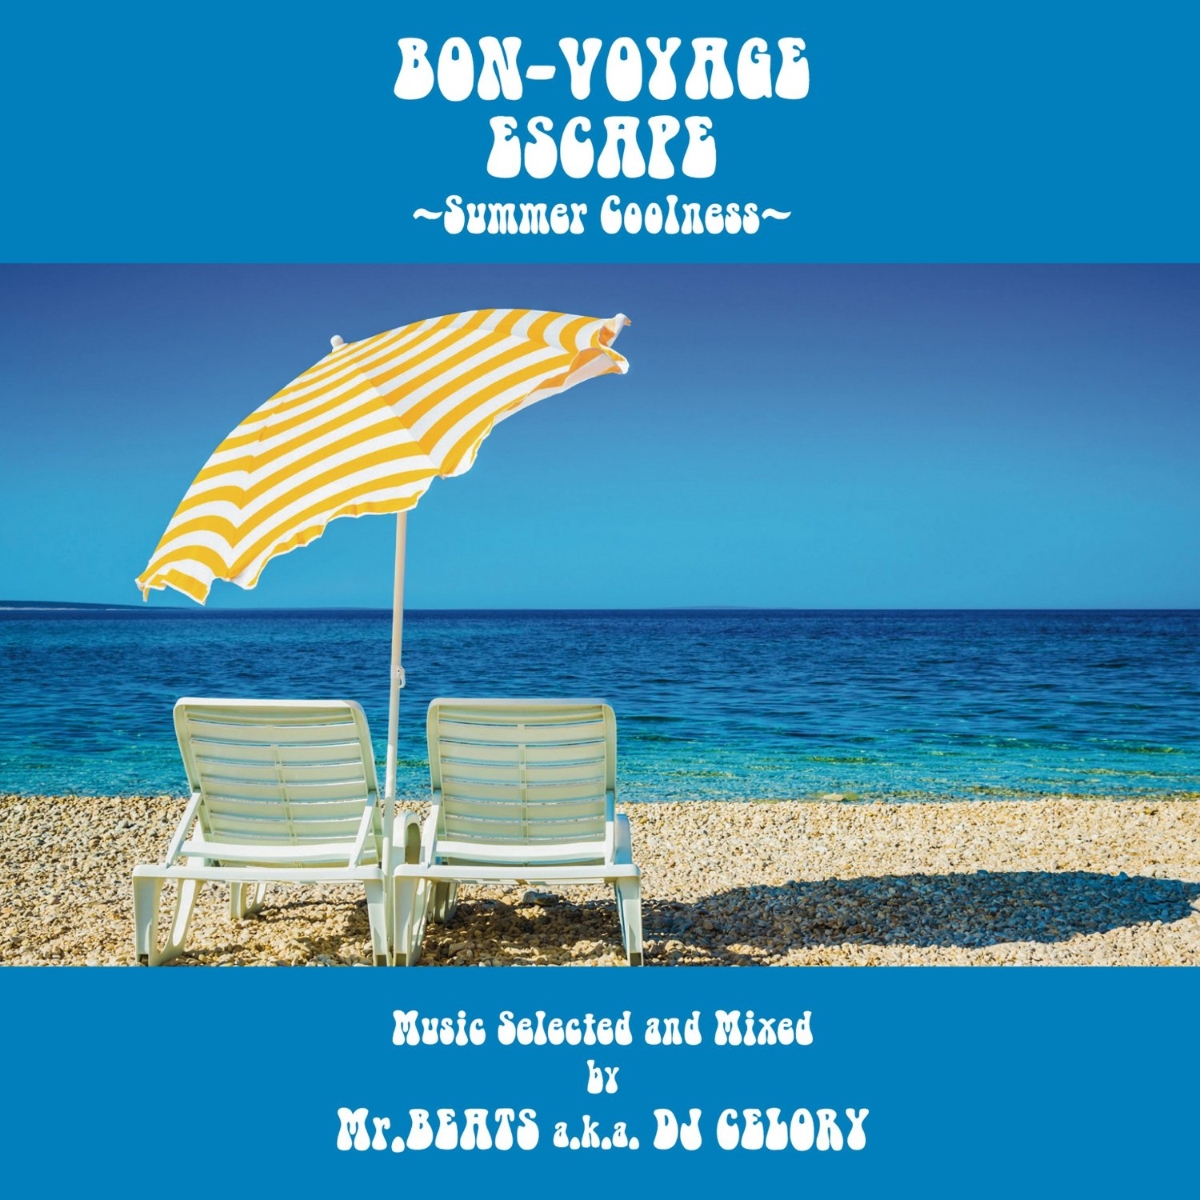 BON-VOYAGE ESCAPE 〜Summer Coolness〜 Music selected and Mixed by Mr.BEATS a.k.a DJ CELORY画像